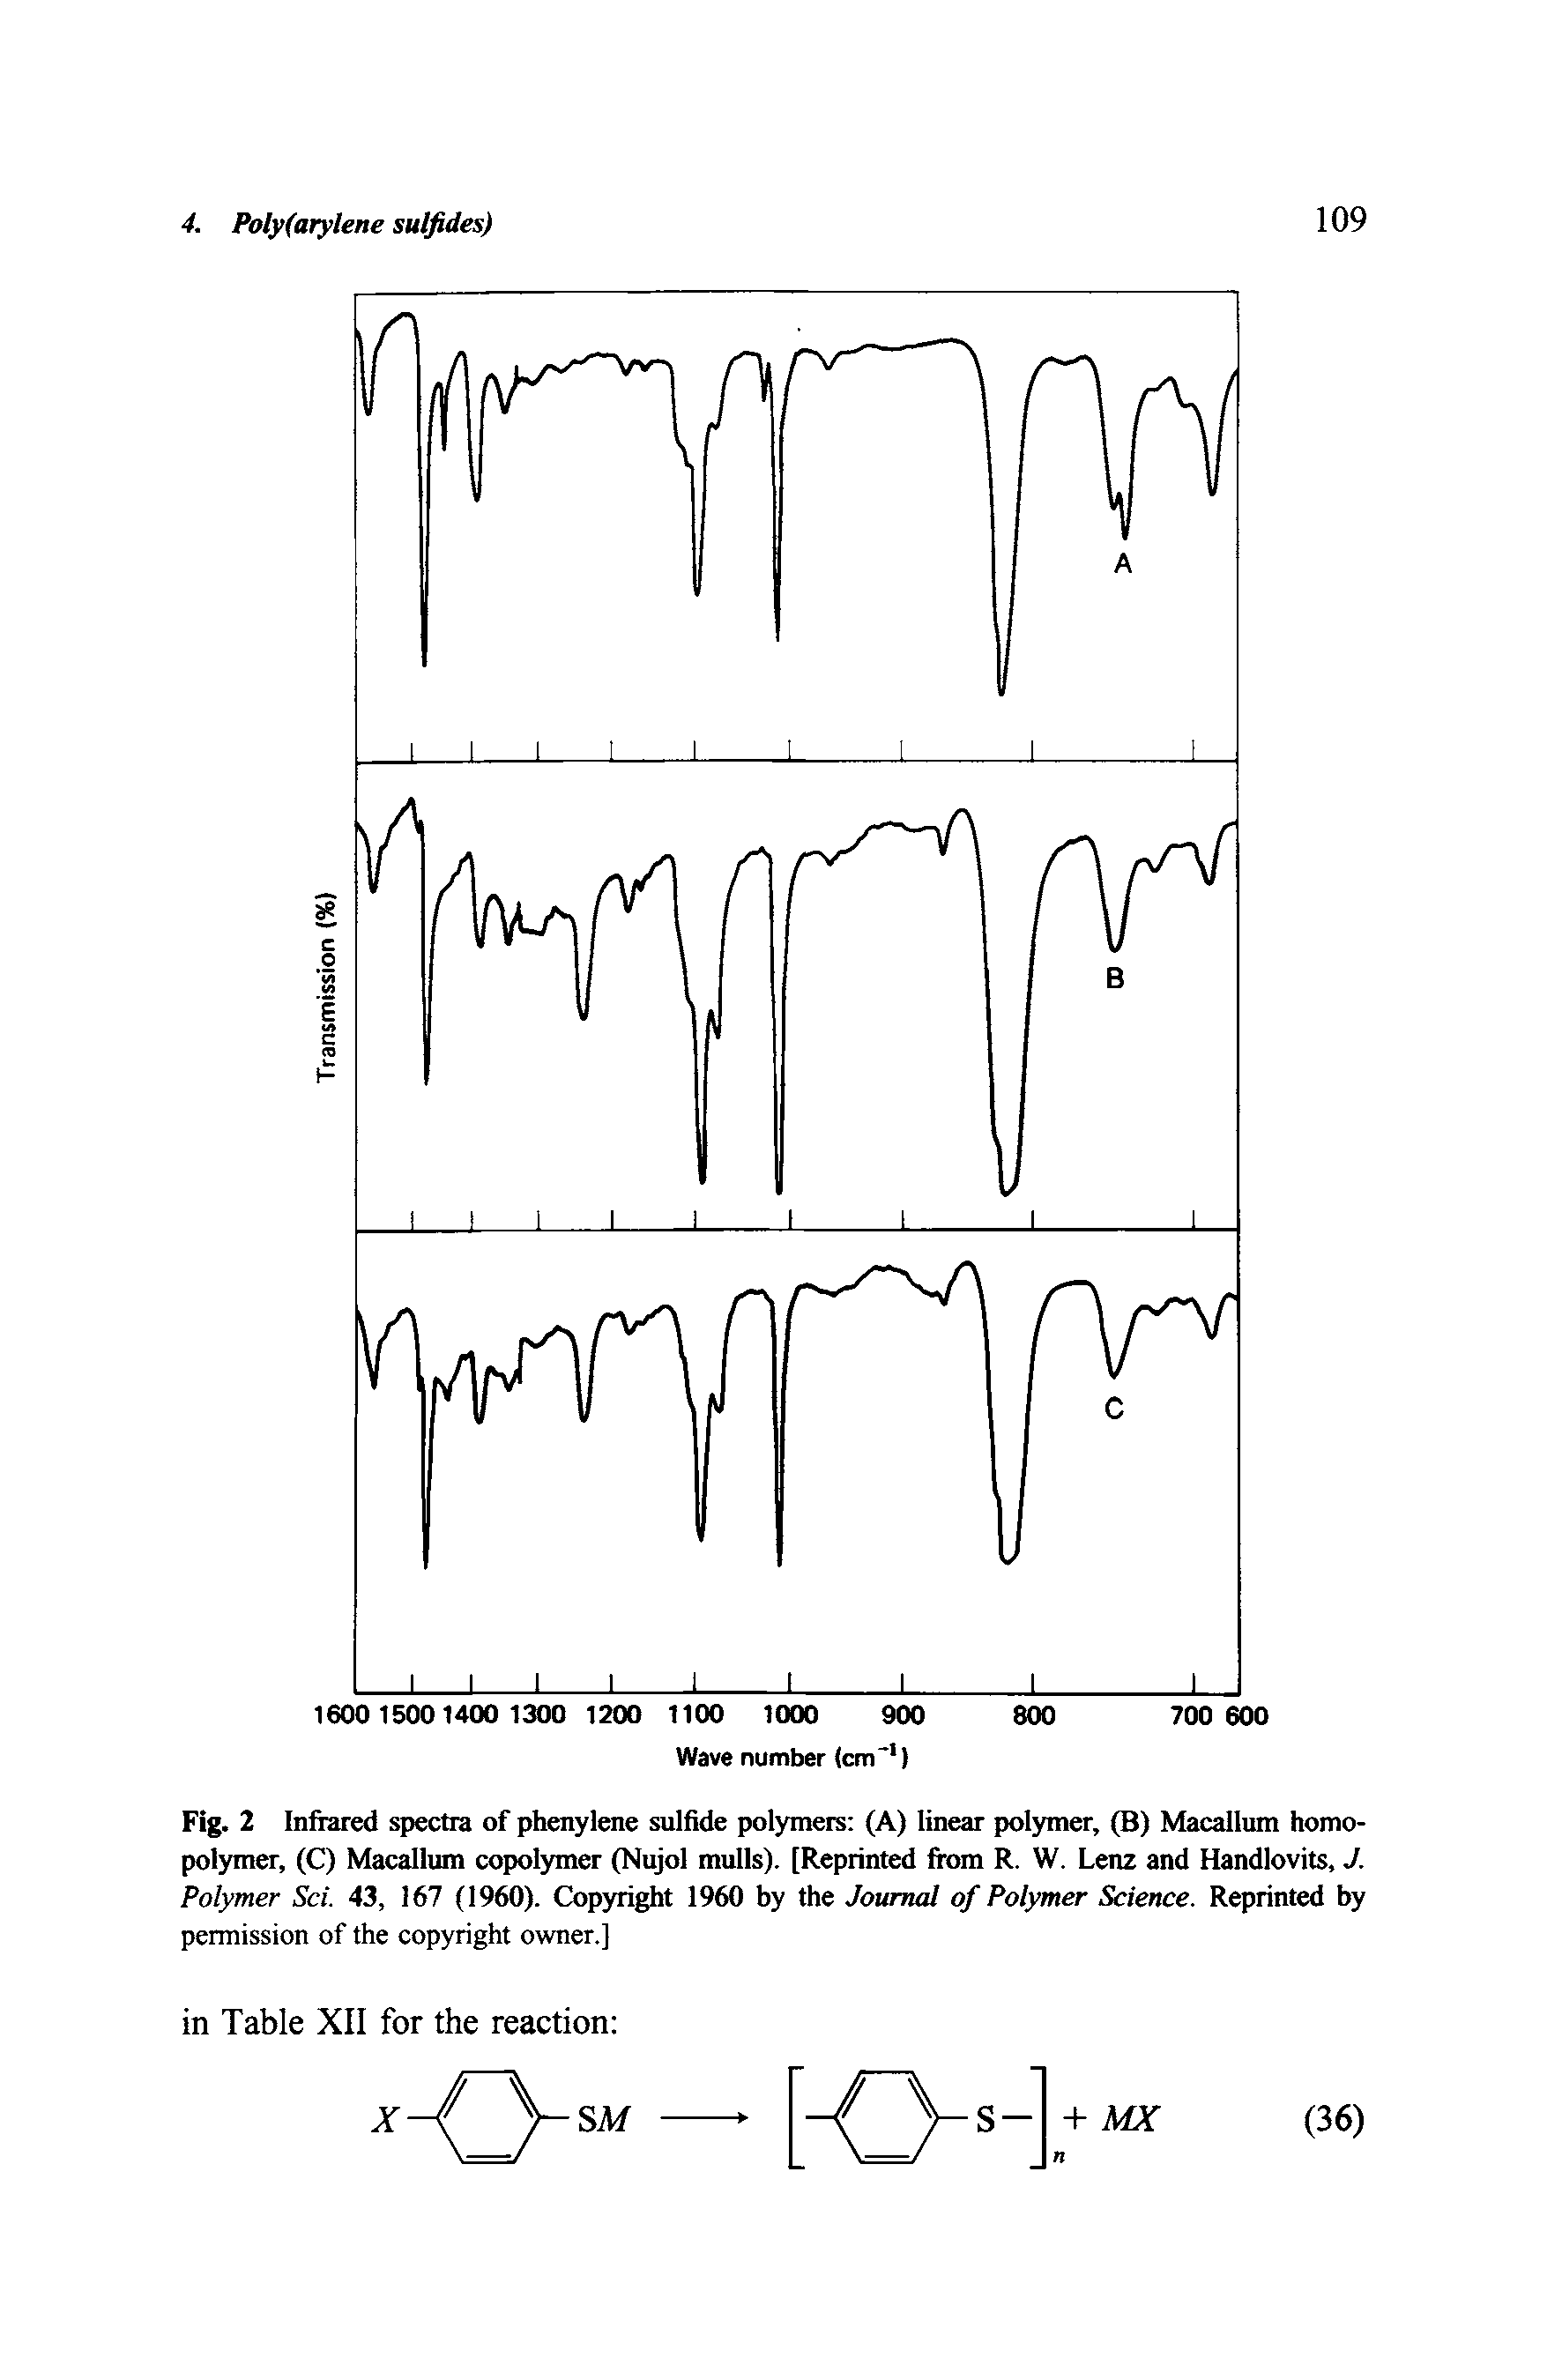 Fig. 2 Iniiaied spectra of phenylene sulfide polymers (A) linear polymer, (B) Macallum homopolymer, (C Macallum copolymer (Nujol mulls). [Reprinted from R. W. Lenz and Handlovits, J. Polymer Sci. 43, 167 (1960). Copyright 1960 by the Journal of Polymer Science. Reprinted by...